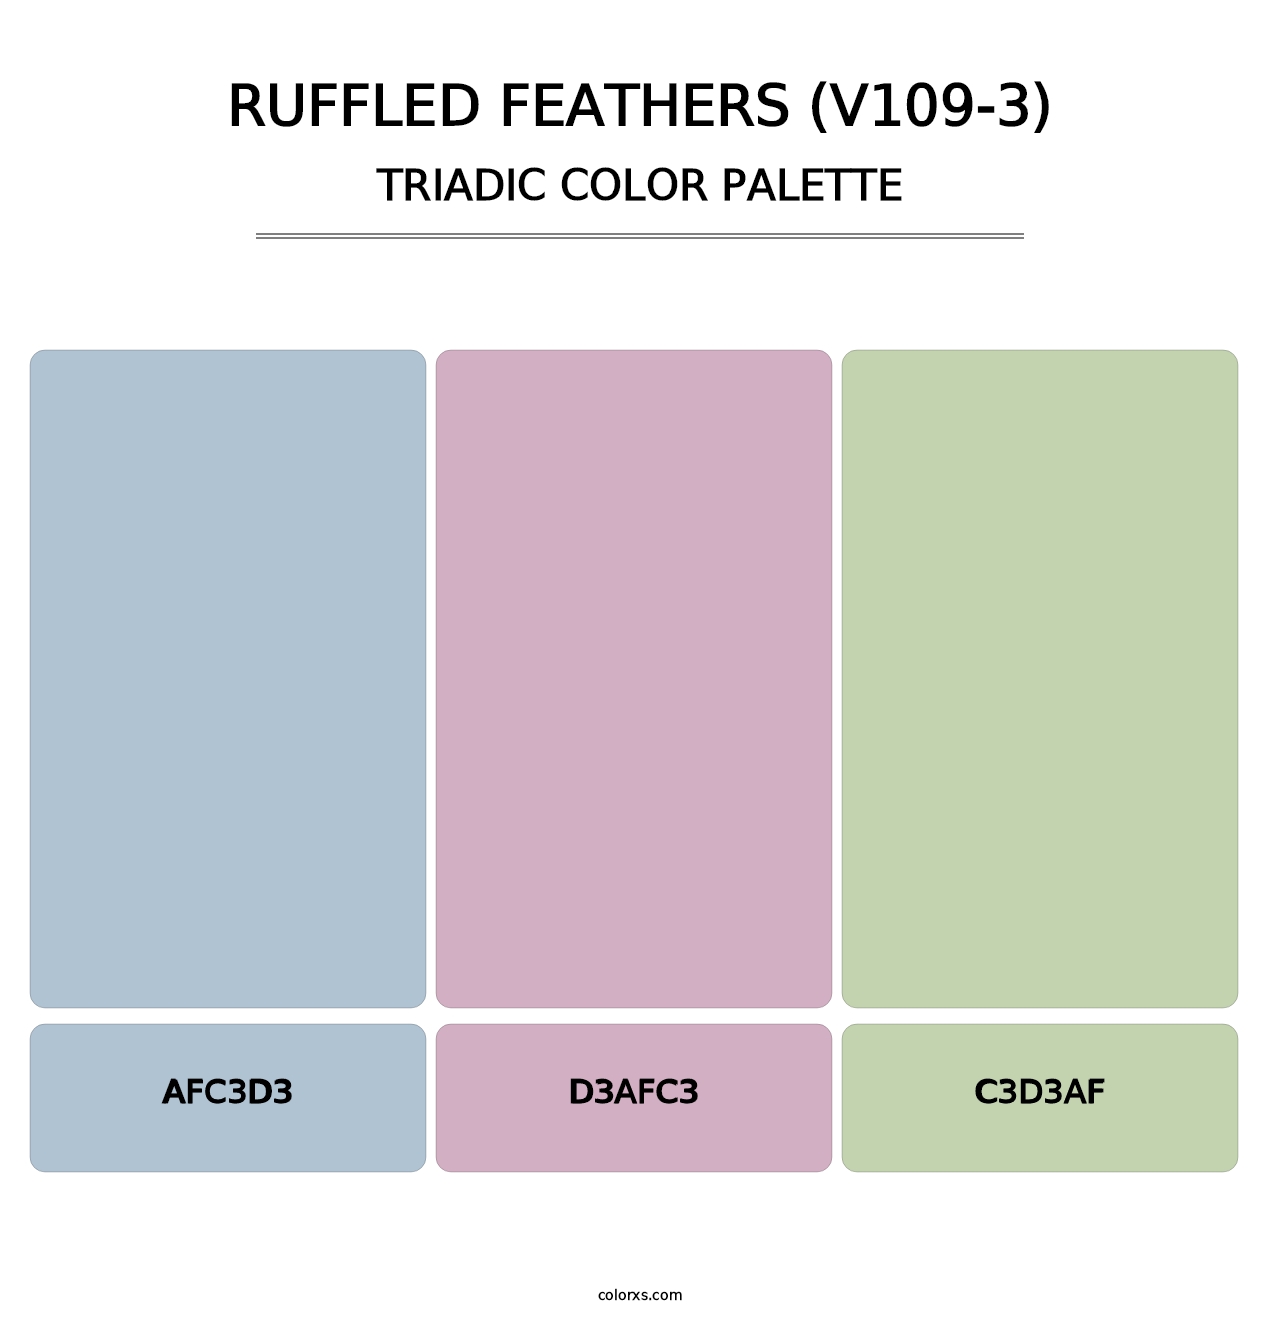 Ruffled Feathers (V109-3) - Triadic Color Palette